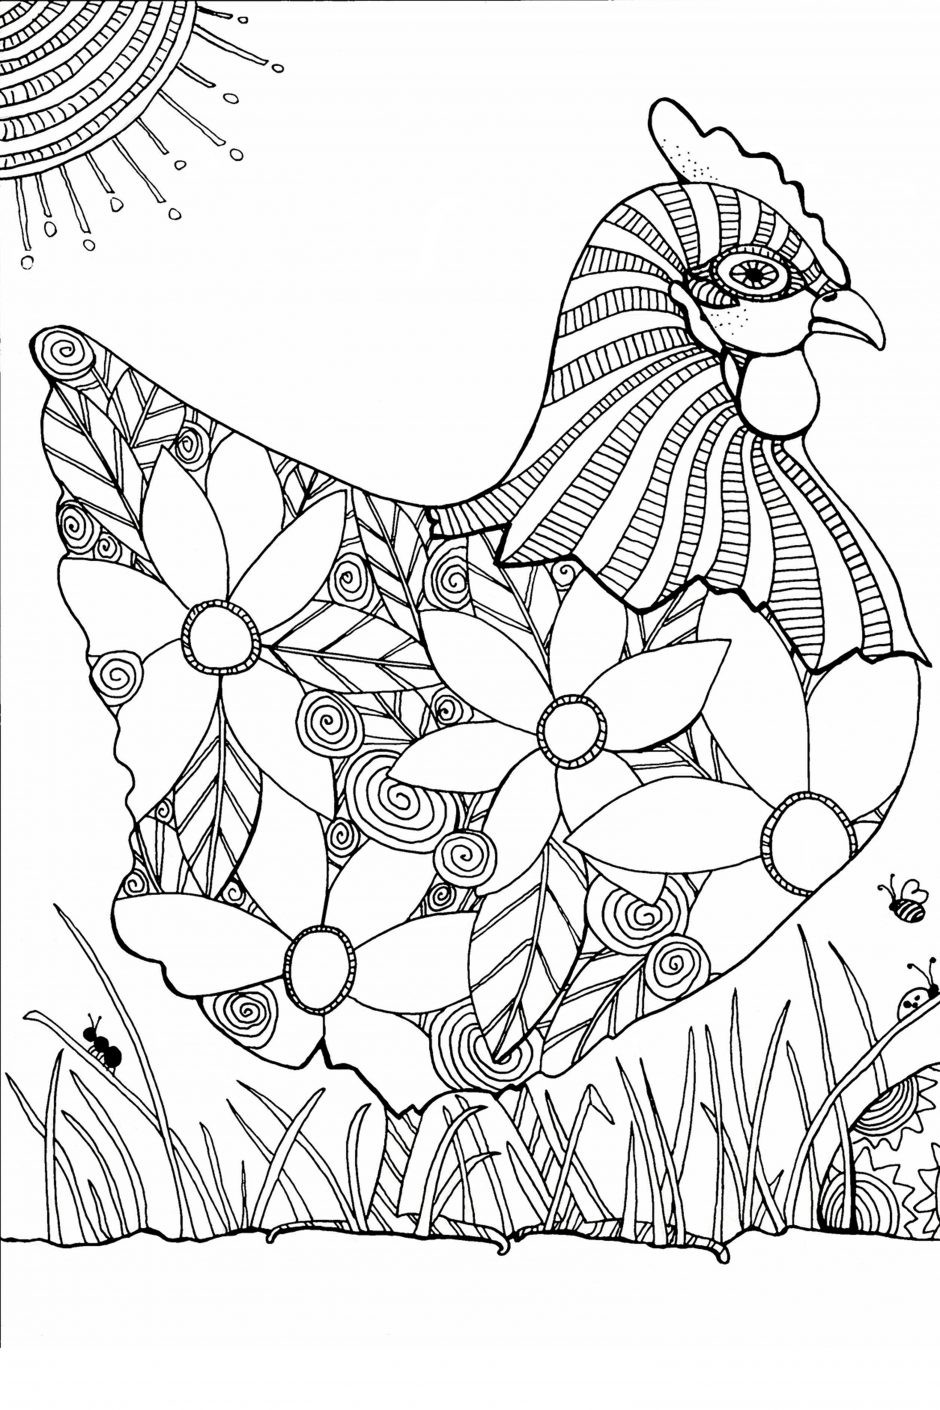 Chicken Coloring Pages For Adults
 Creative Chicken Coloring Book